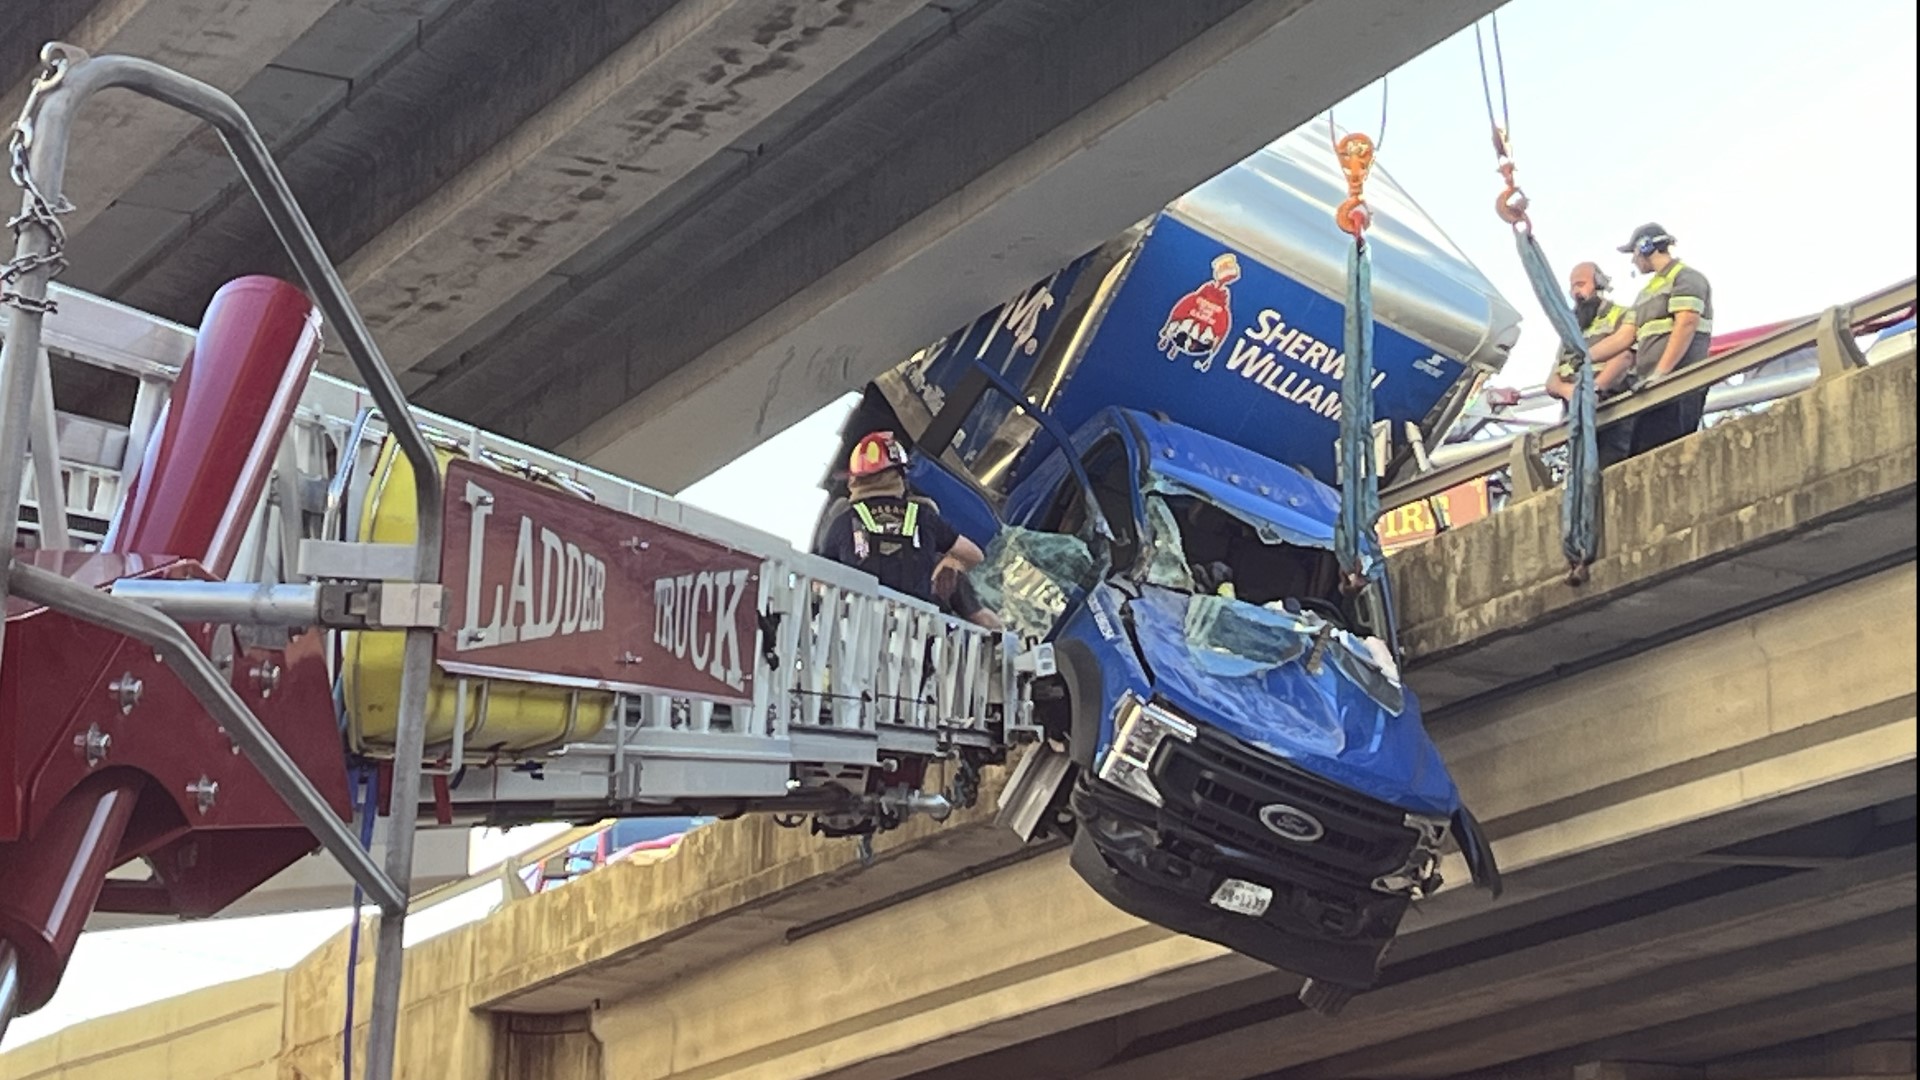 The box truck was hanging off of the Stemmons Freeway overpass with the driver still stuck inside on Monday afternoon.